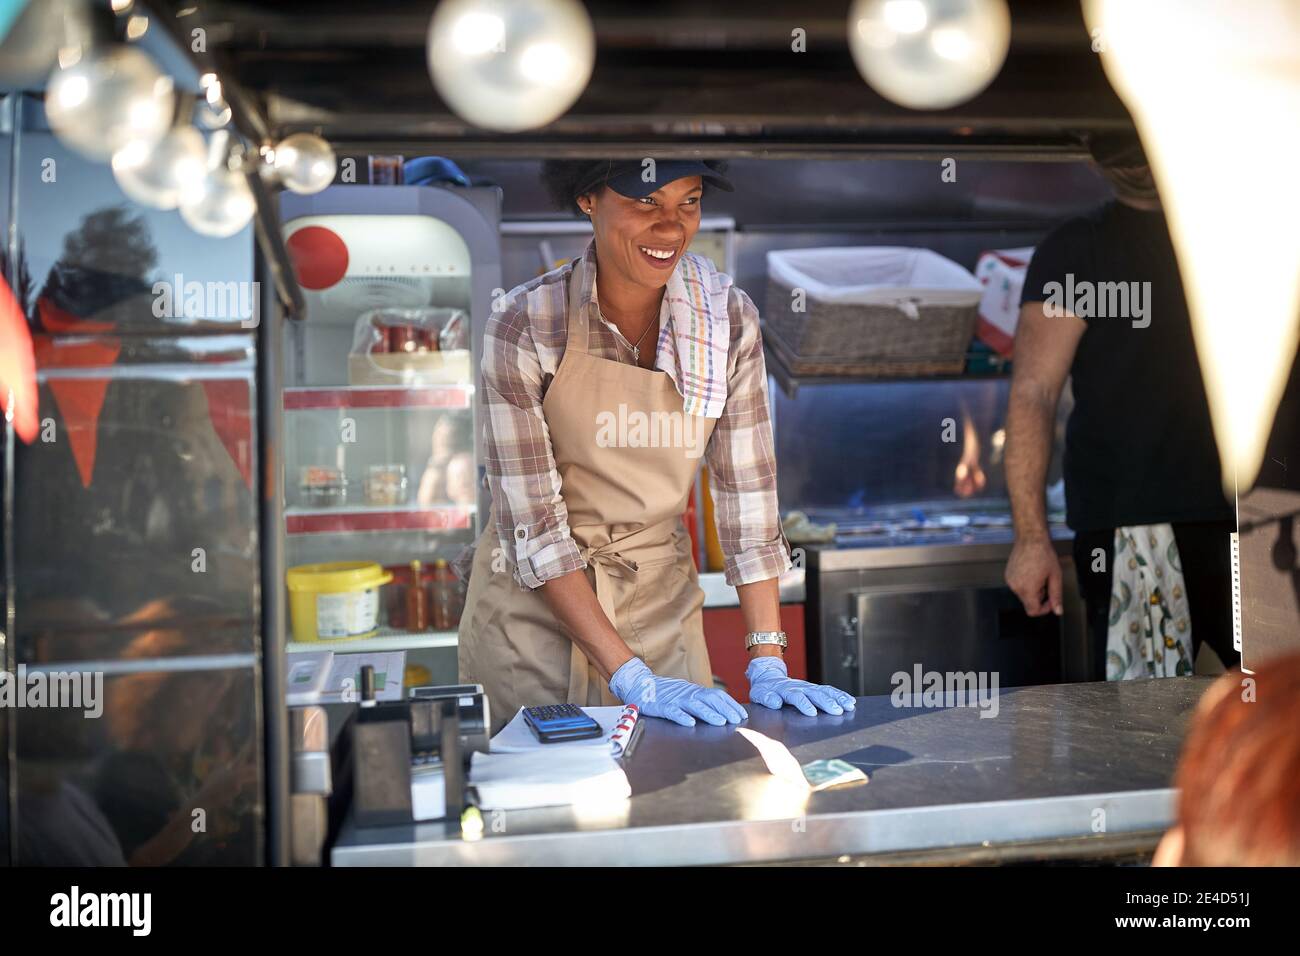 young afro-american female employee in fast food service looking at customers with smile Stock Photo